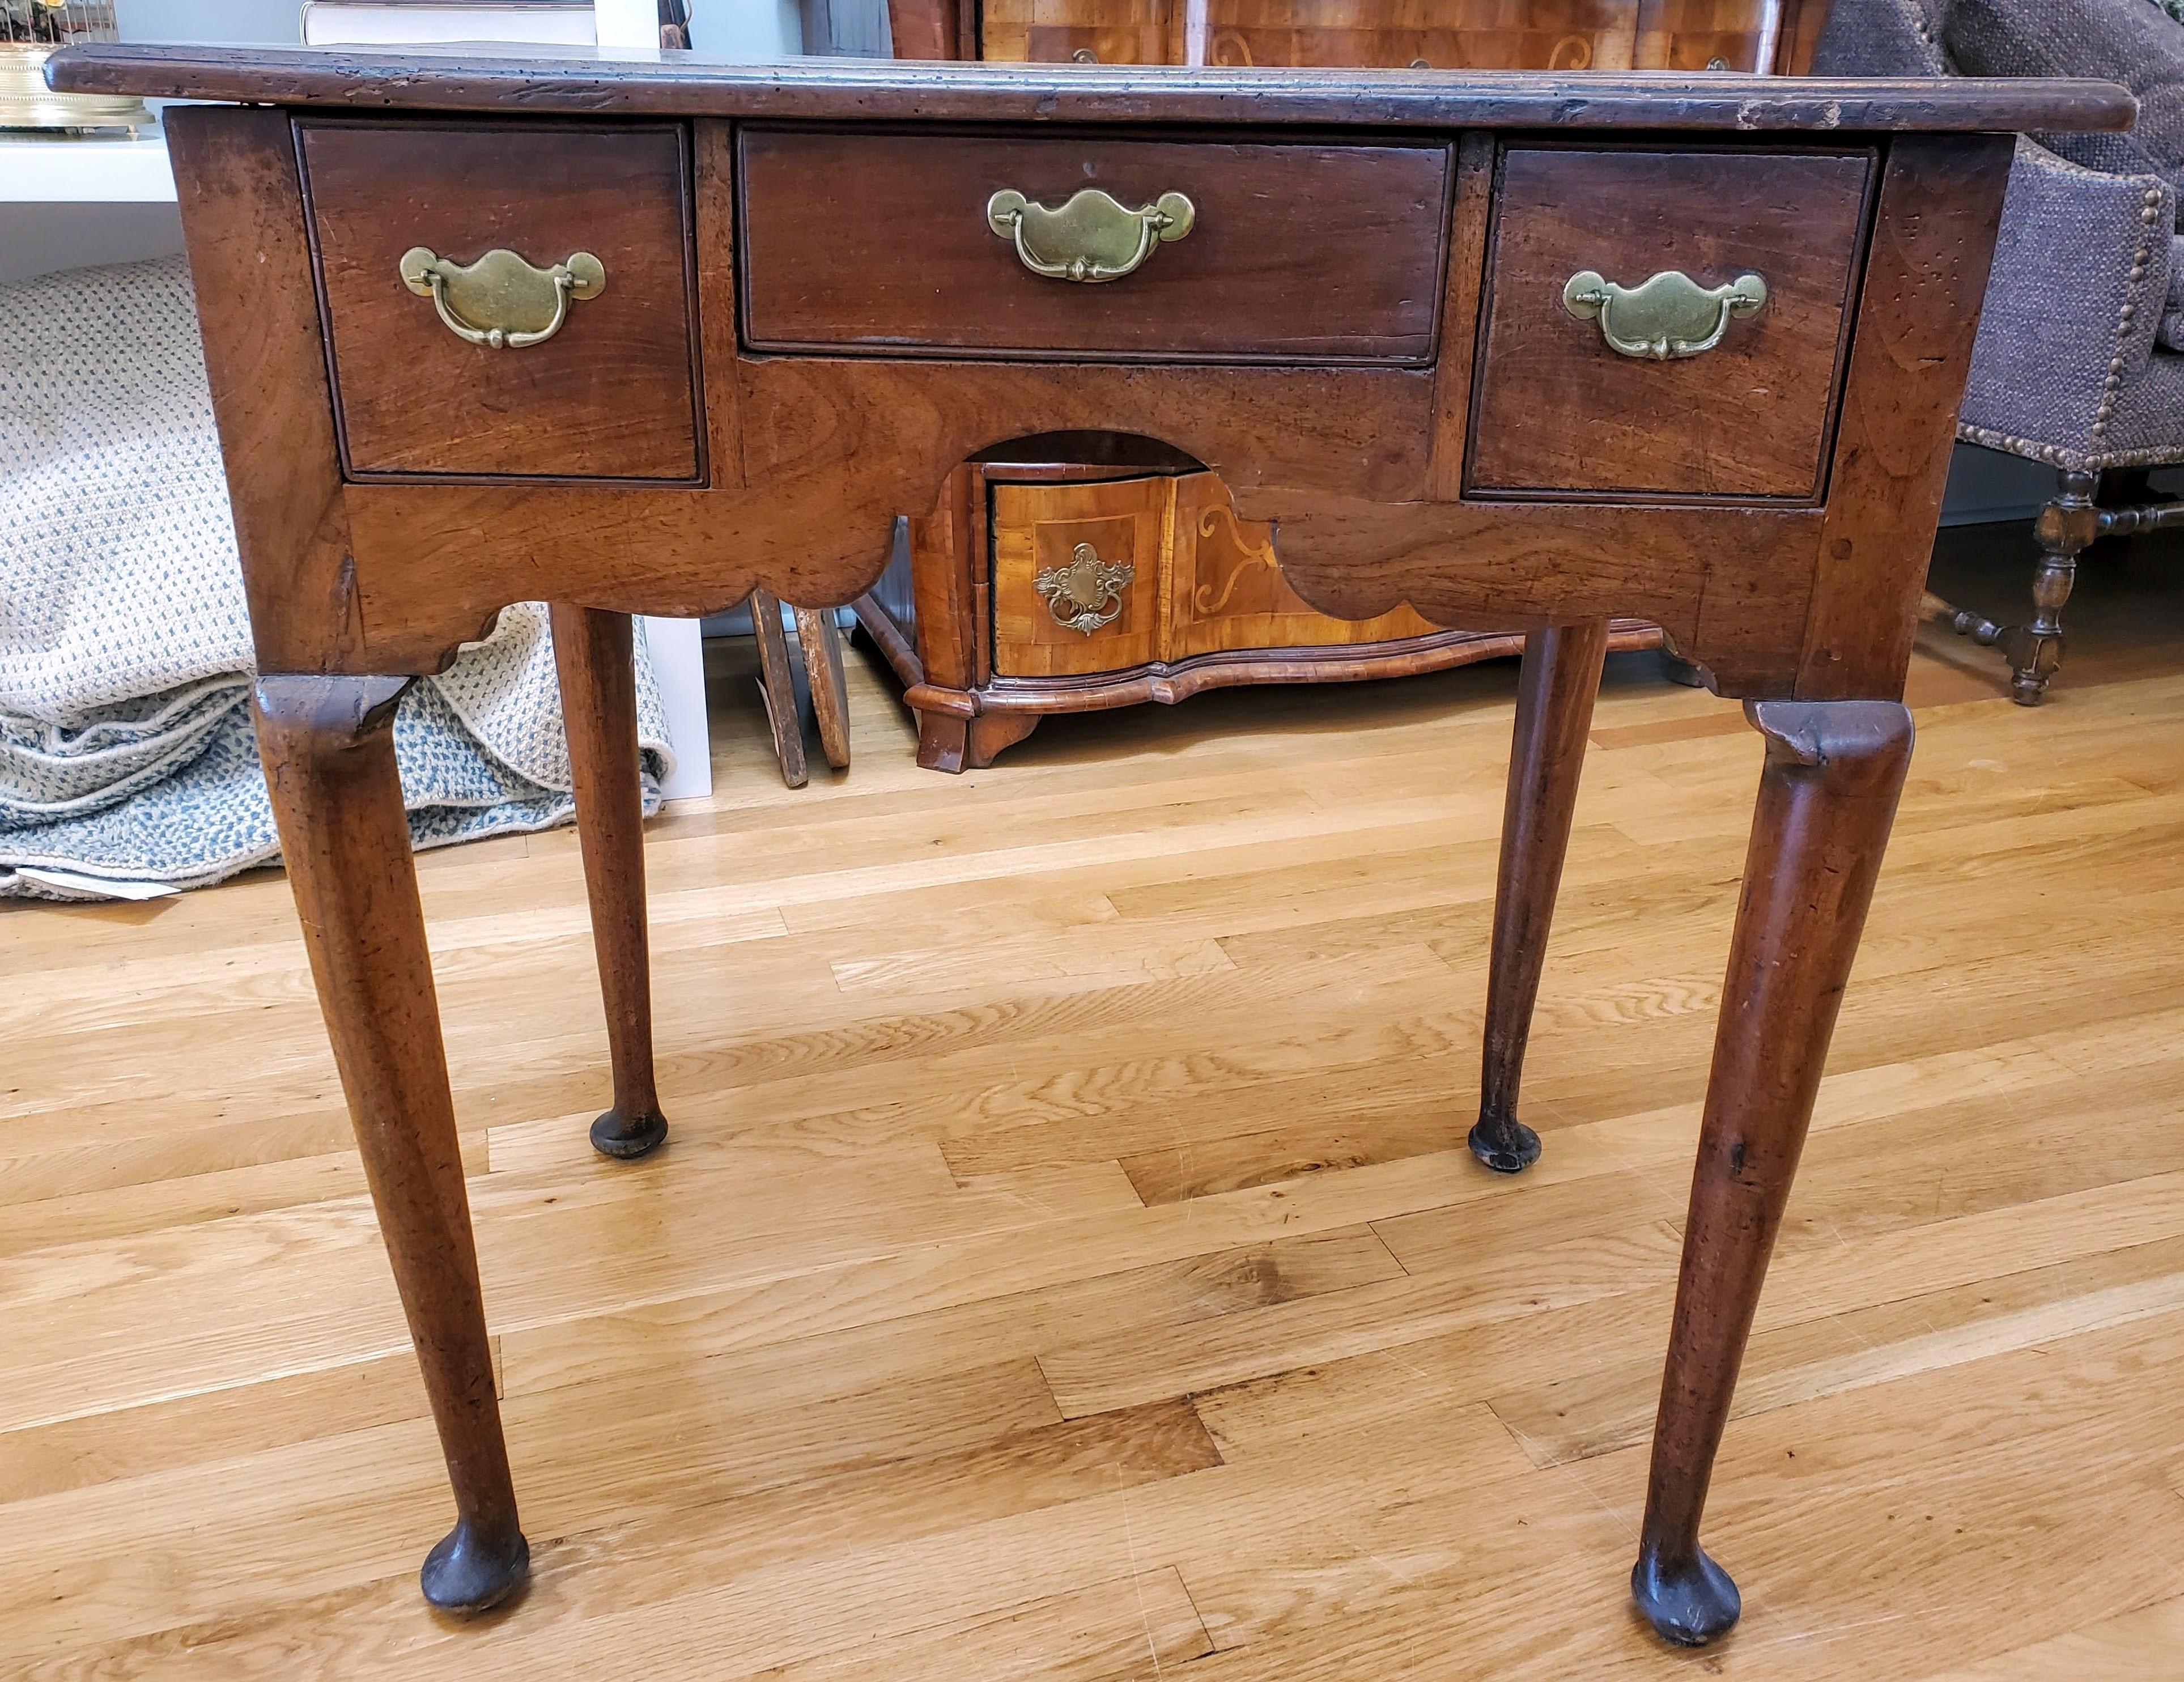 Early 18th century George I walnut lowboy table with three drawers and cabriole legs
Made of highly figured and richly patinated walnut with three drawers retaining the original brass hardware and shaped brackets to cabriole legs with pad feet.